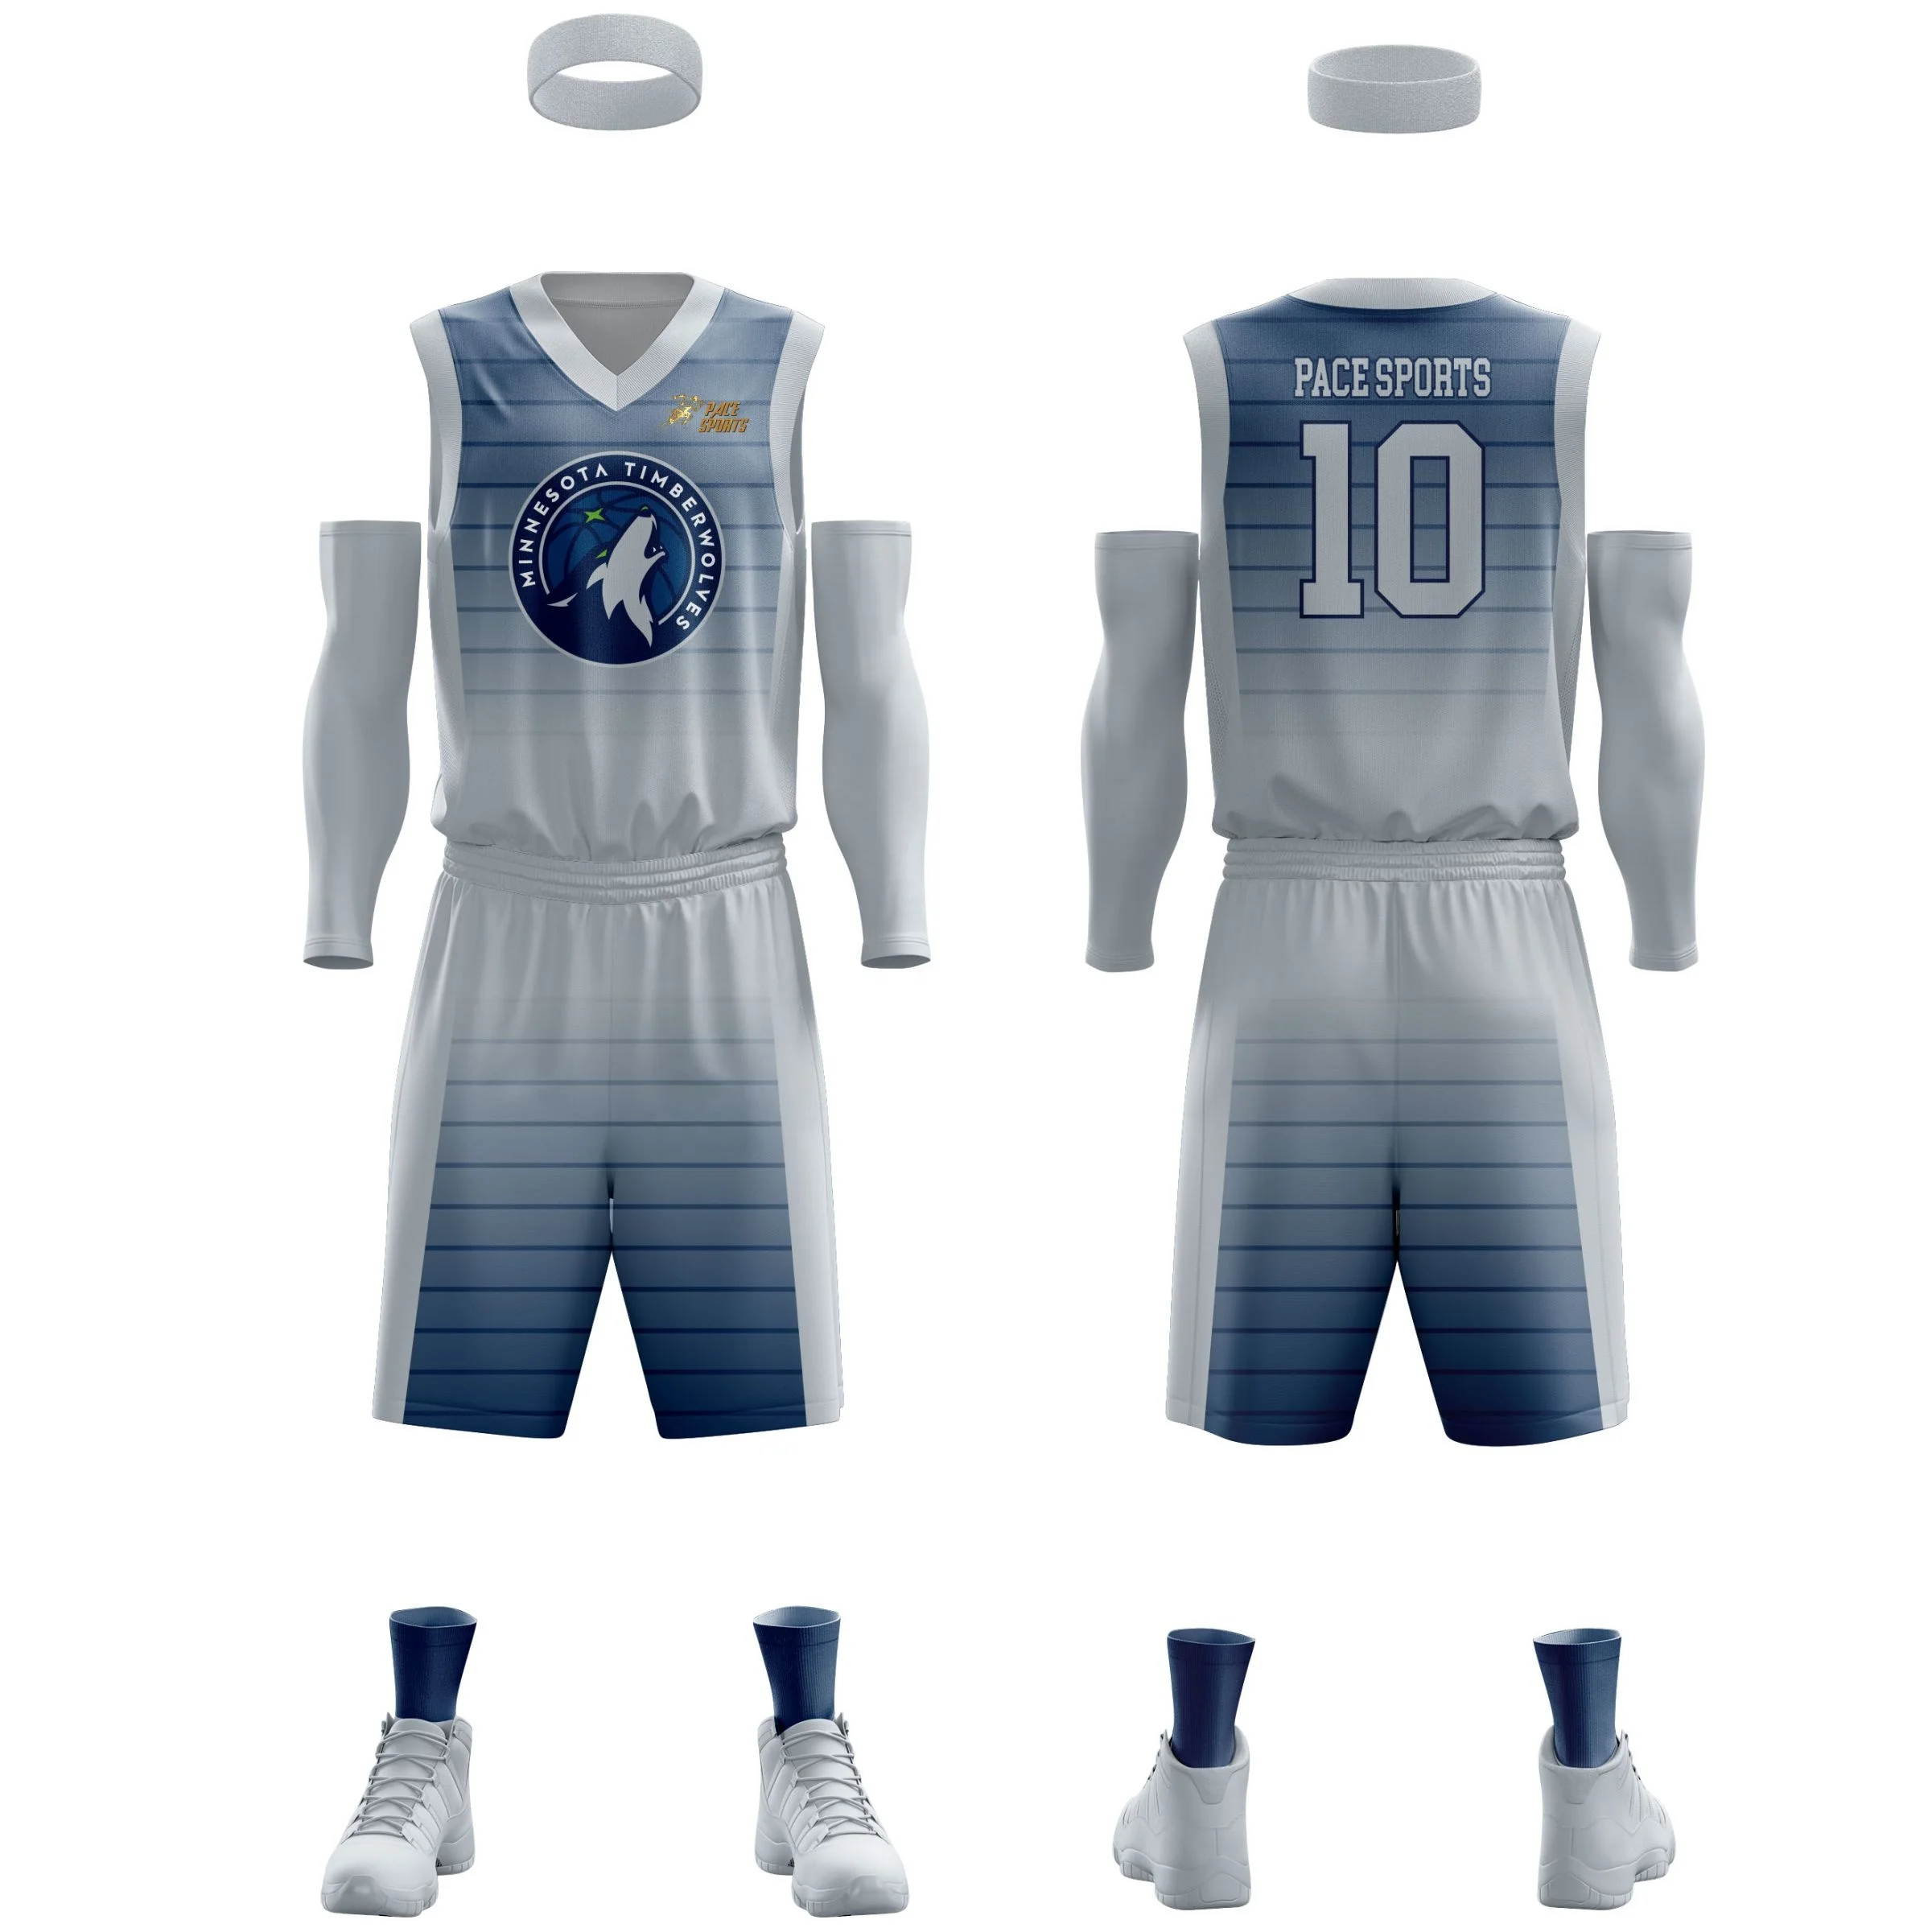 timberwolves sublimation jersey